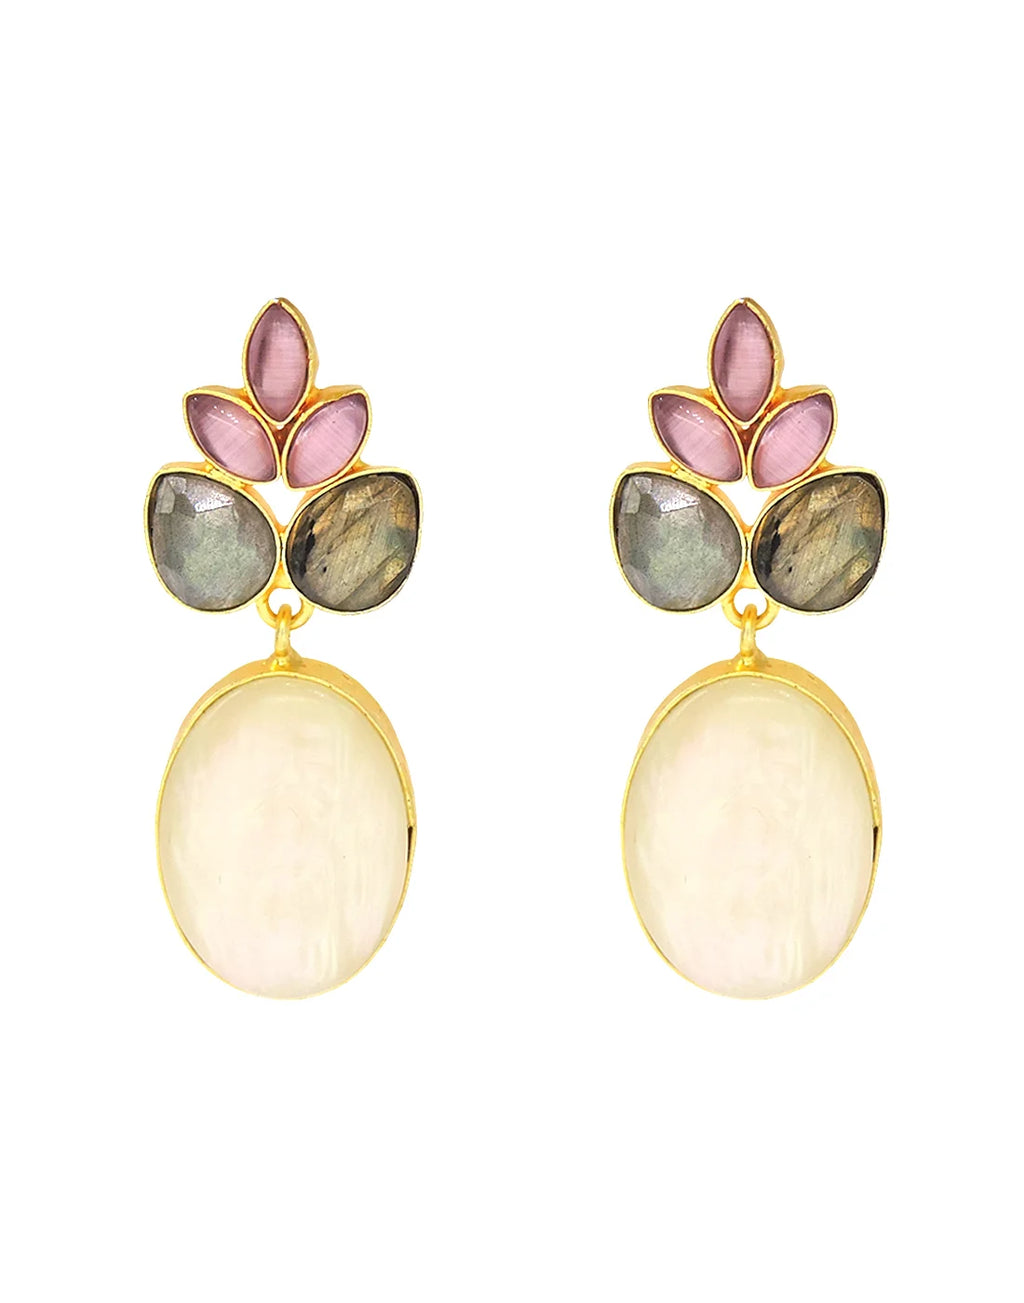 Trio Glass & Pearl Earrings- Handcrafted Jewellery from Dori